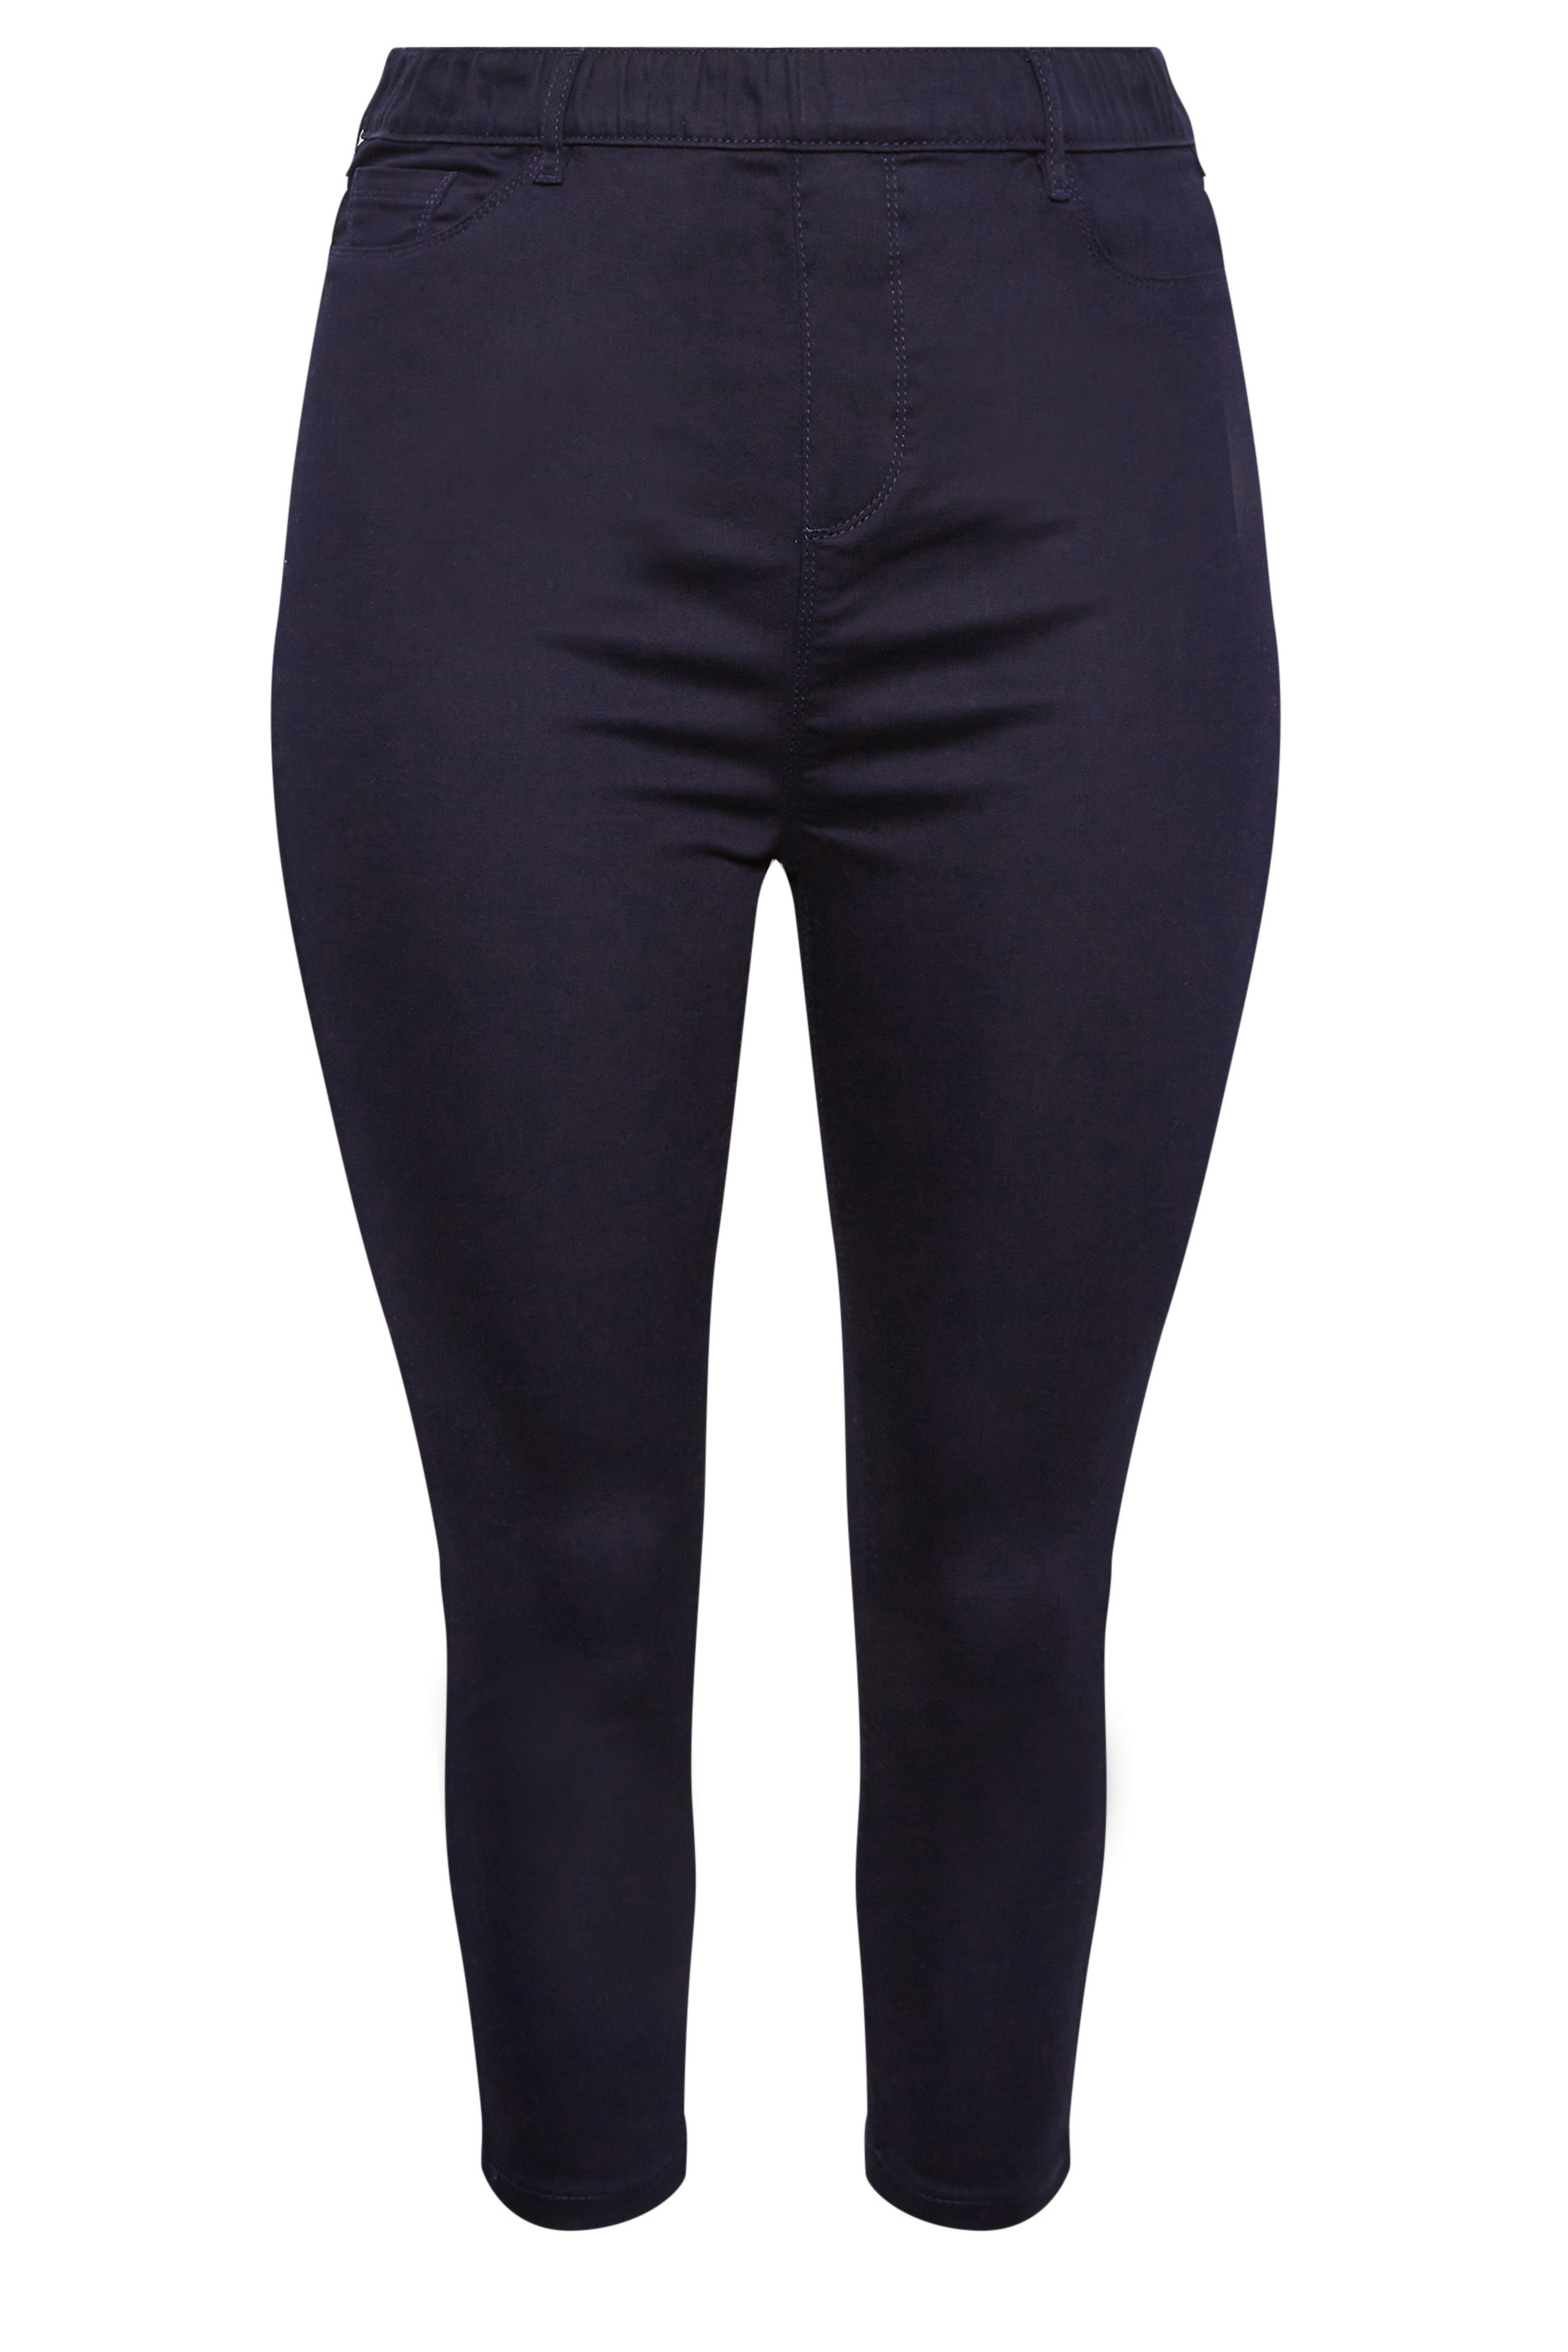 YOURS Plus Size Navy Blue Cropped Stretch GRACE Jeggings